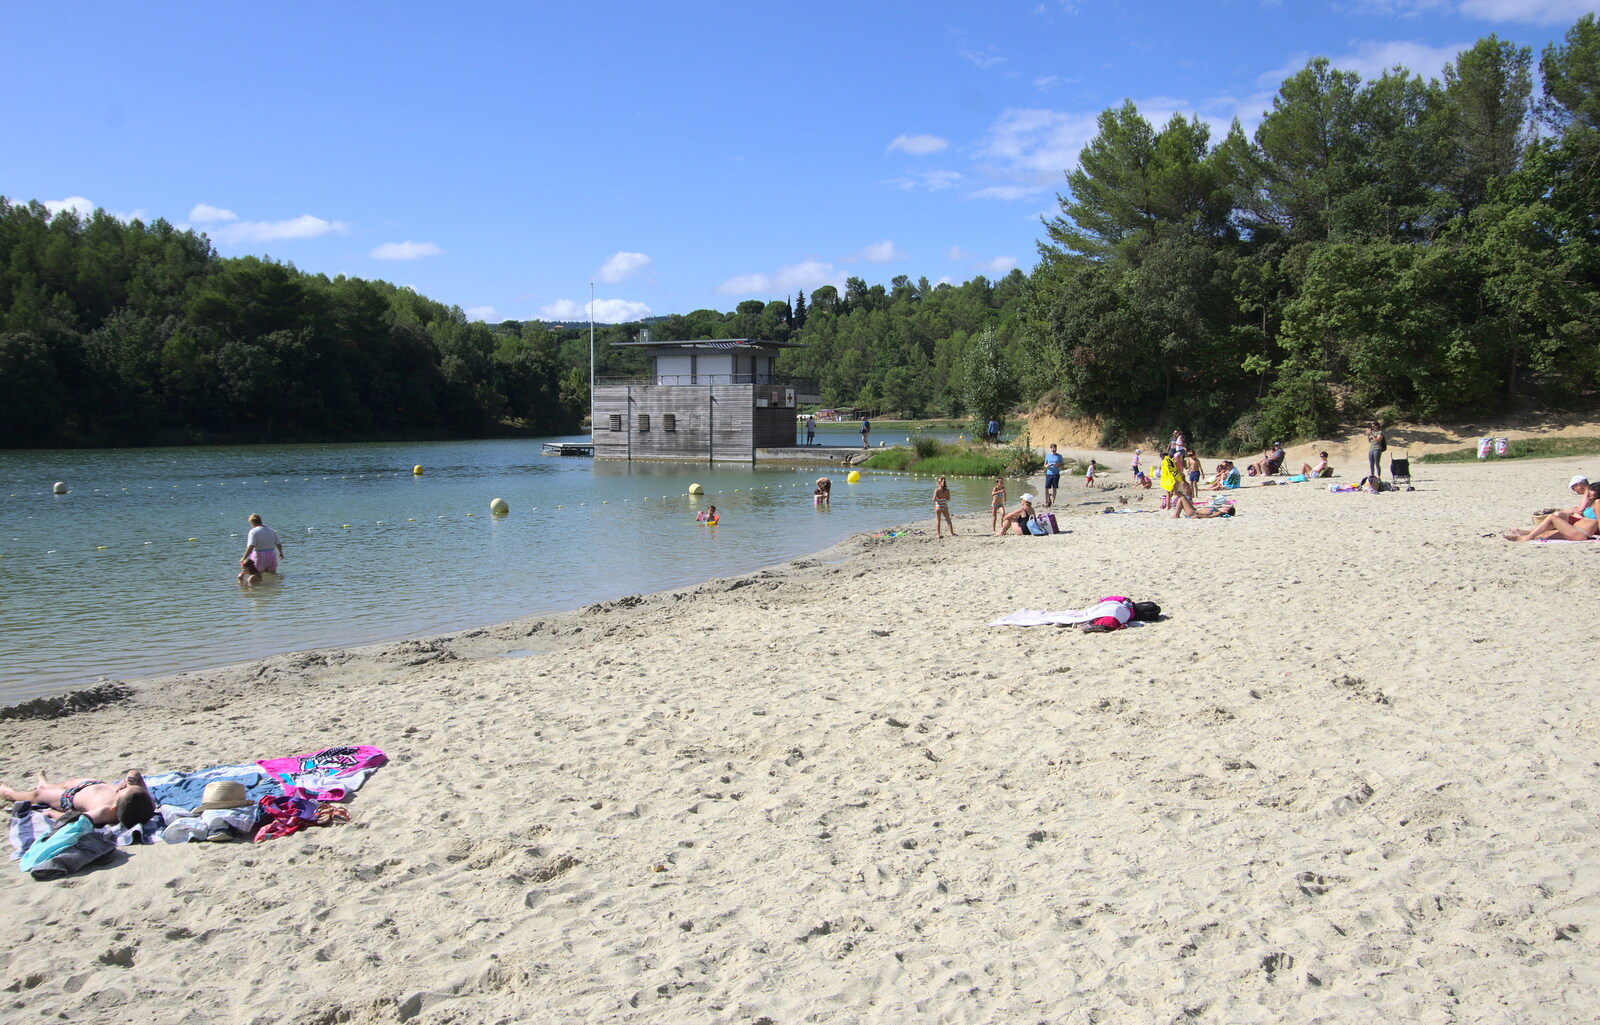 We arrive early when the beach isn't yet too busy from Abbaye Sainte-Marie de Lagrasse and The Lac de la Cavayère, Aude, France - 10th August